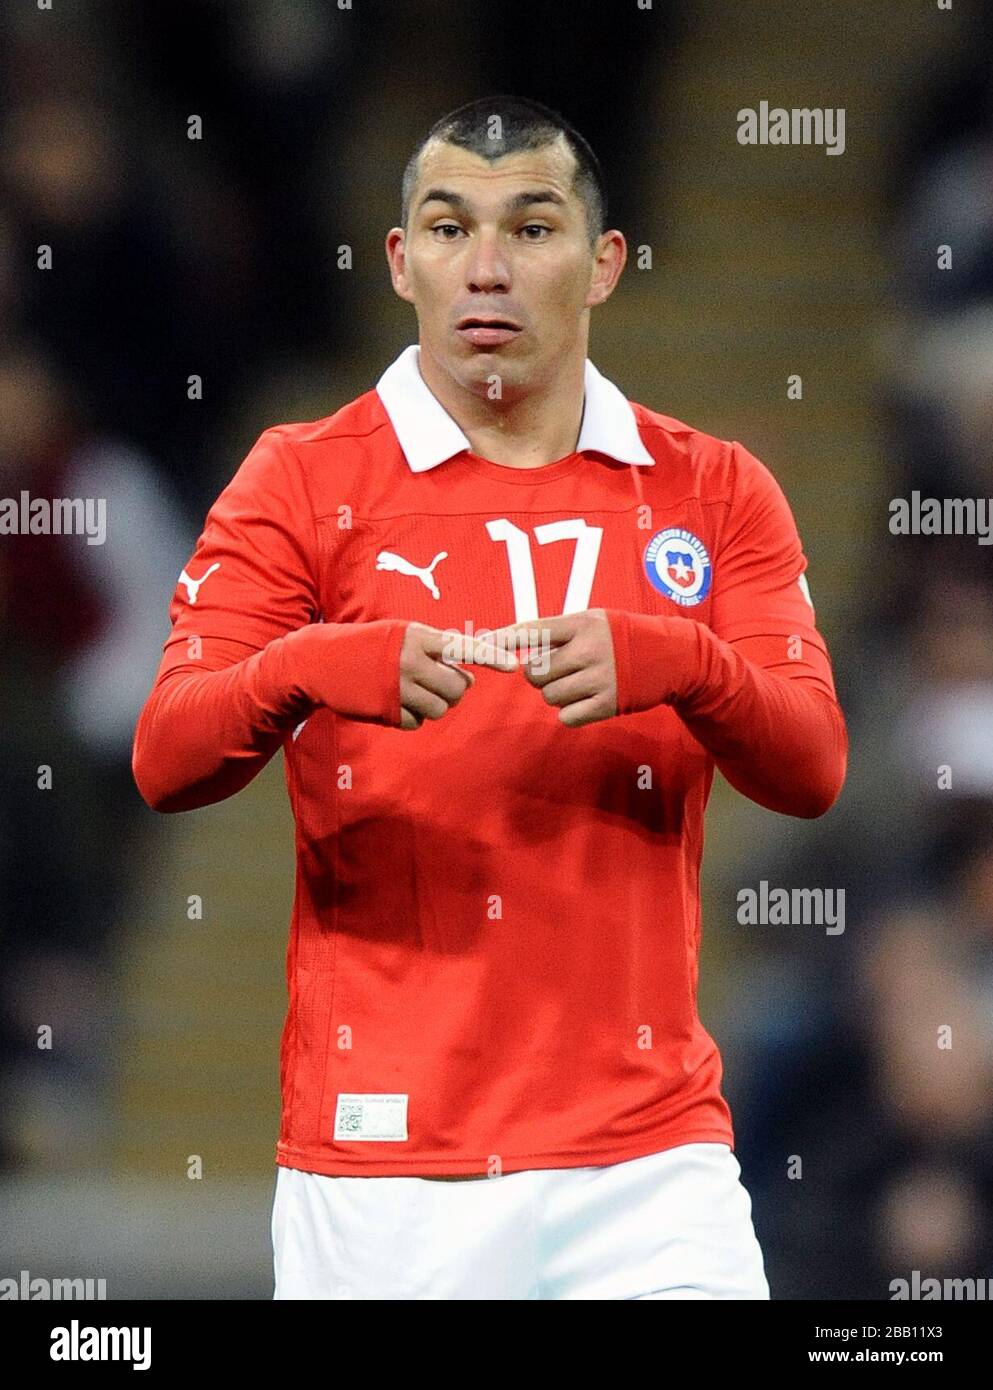 Gary Medel, Chile Stock Photo